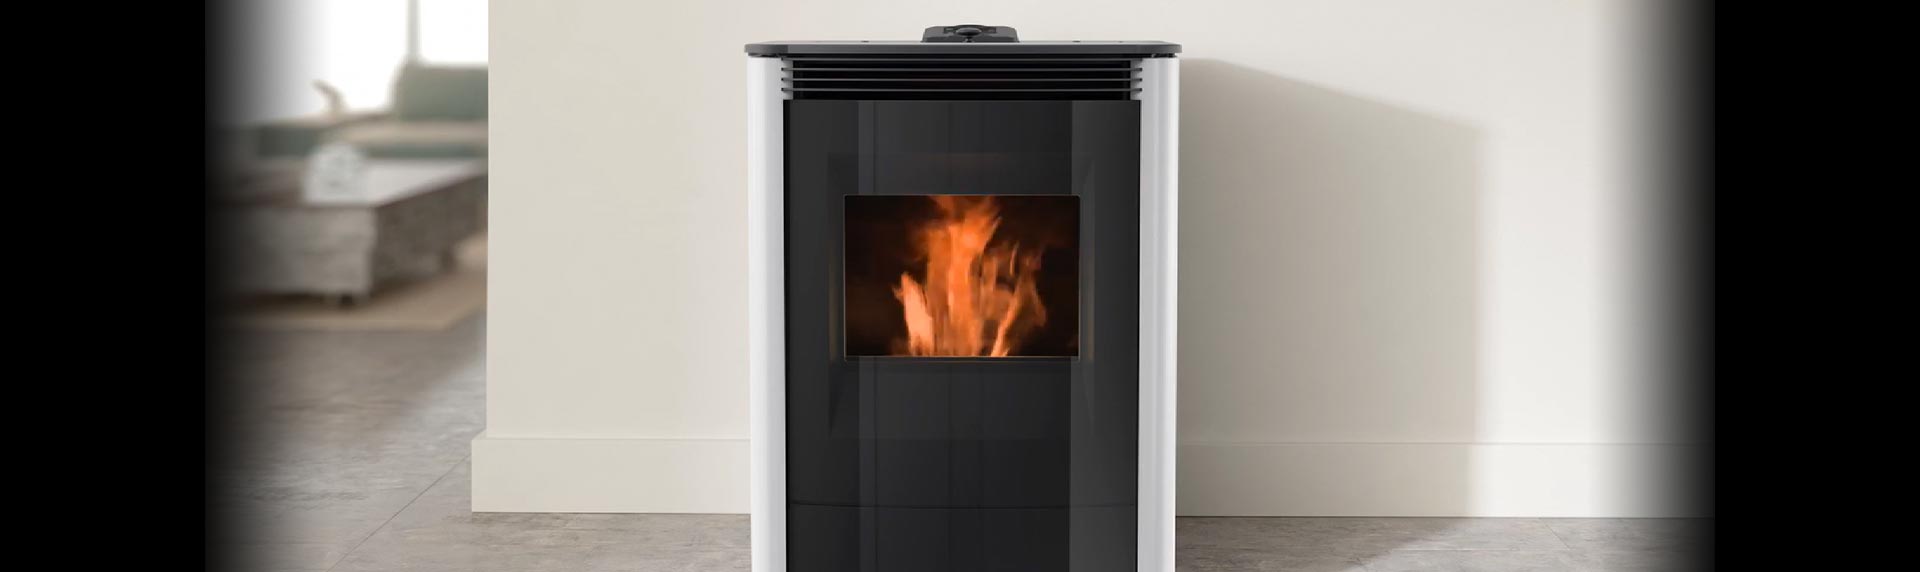 Modern Black and White Pellet Stove against a beige wall